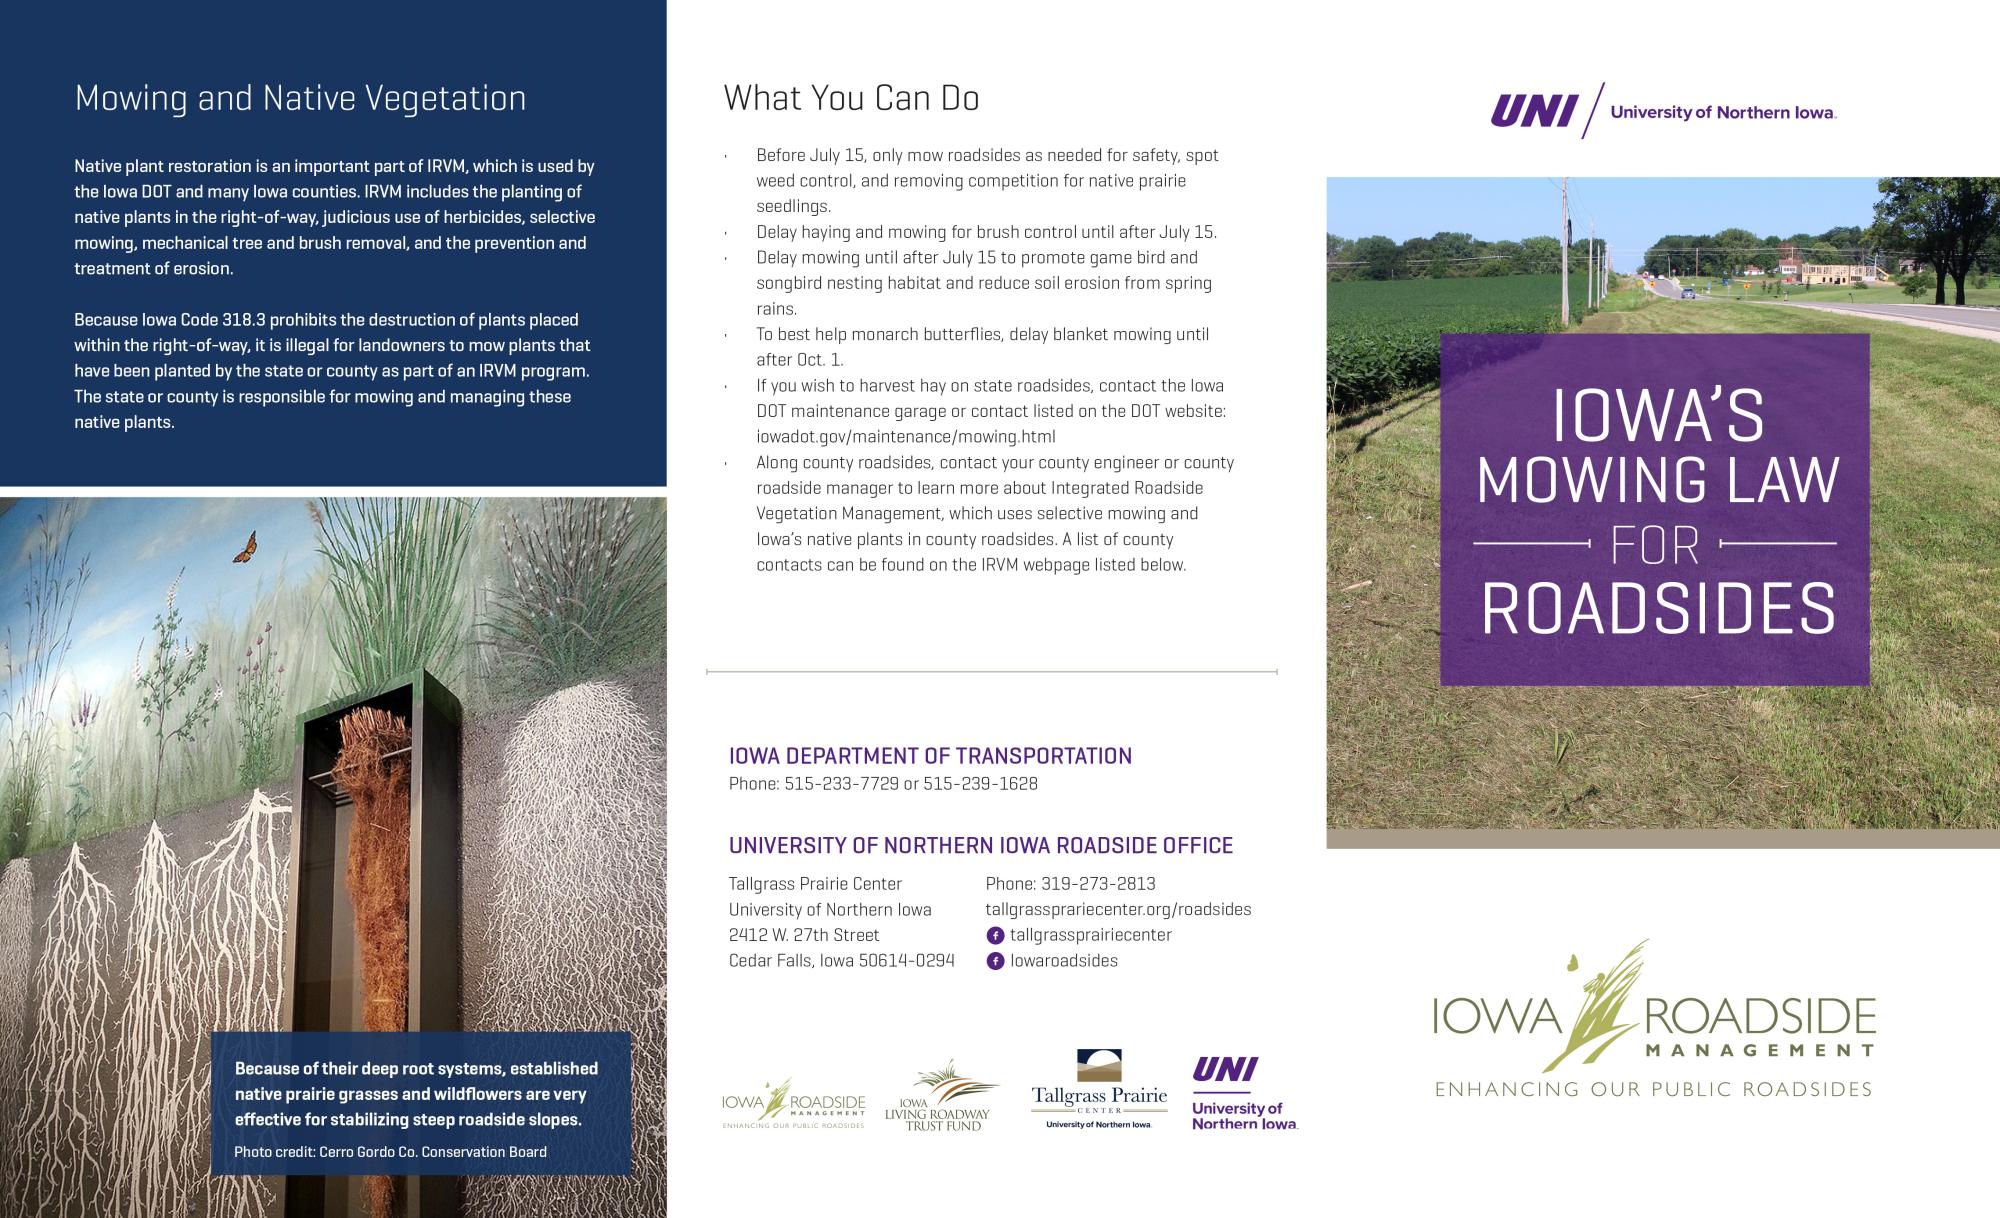 Image of the Iowa's Mowing Law for Roadsides brochure